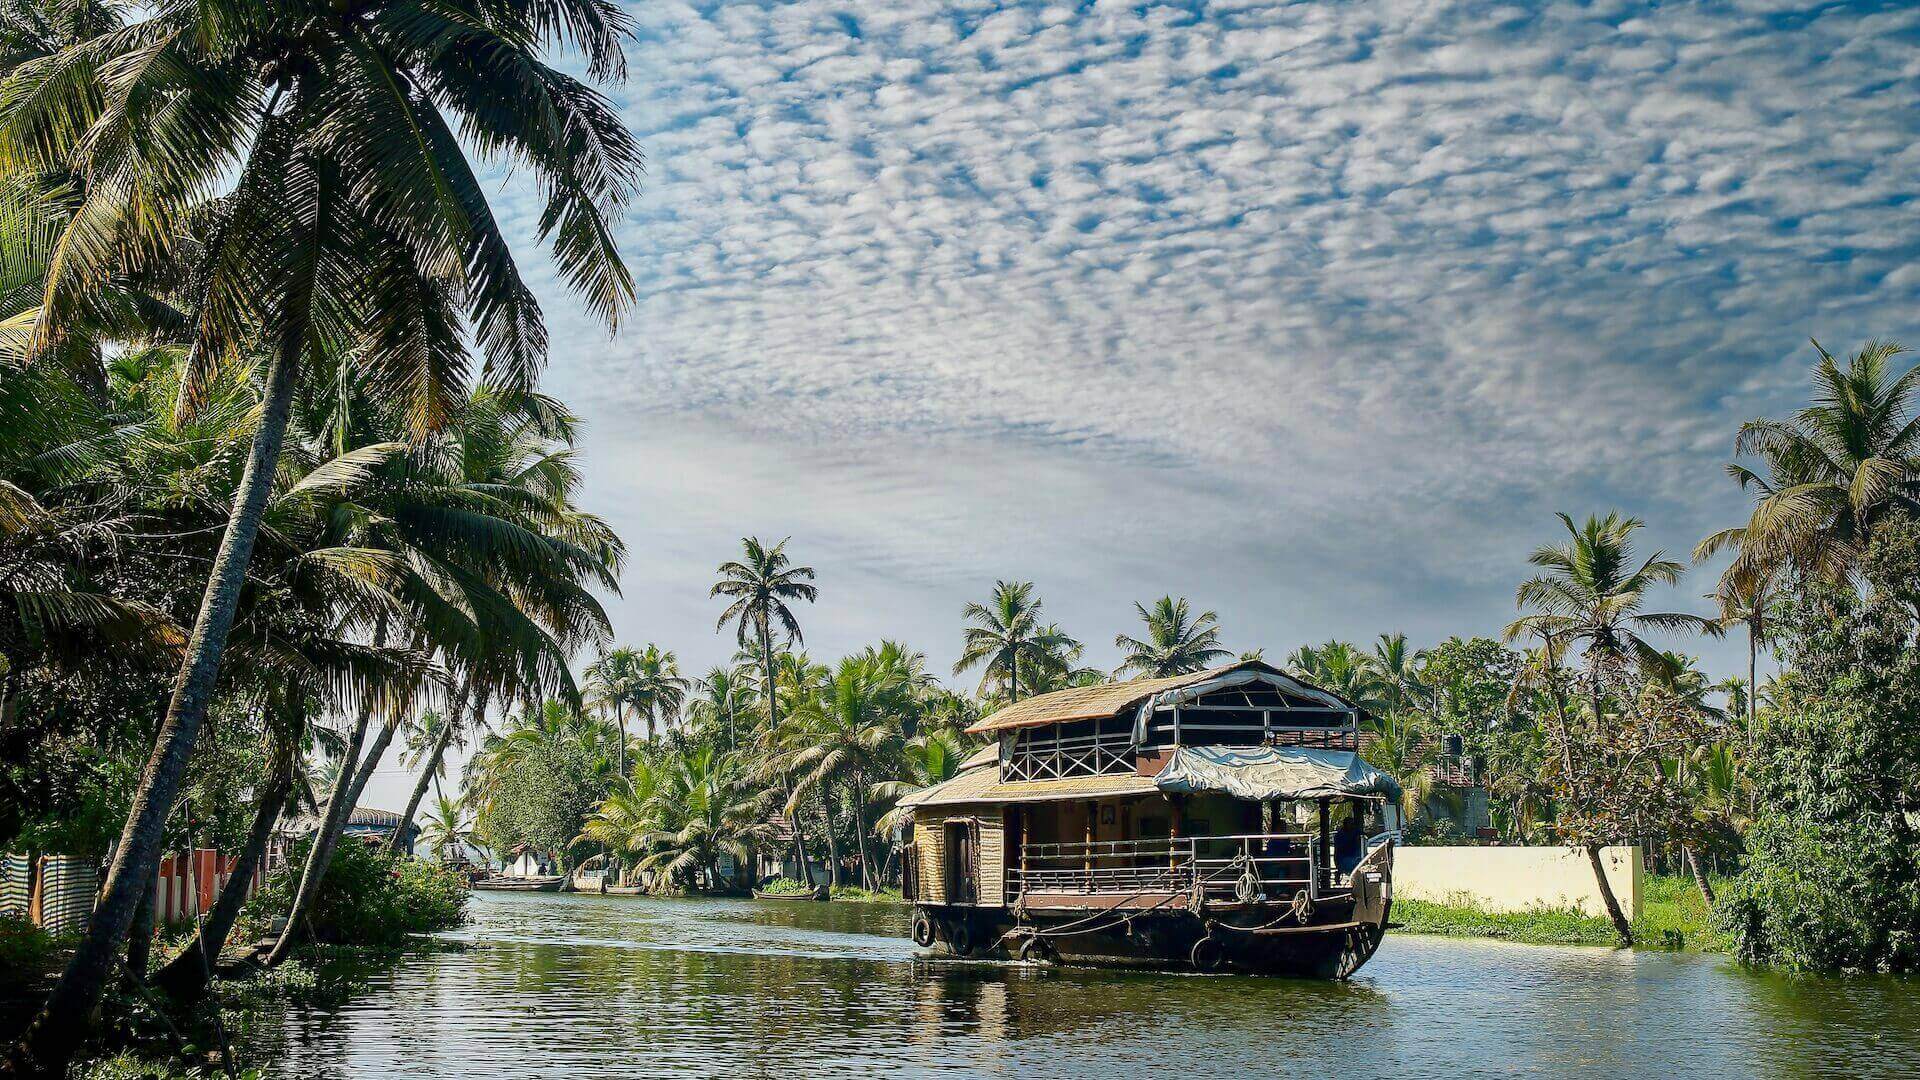 A houseboat in backwater of Alappuzha, Kerala one of the best places to visit in South India